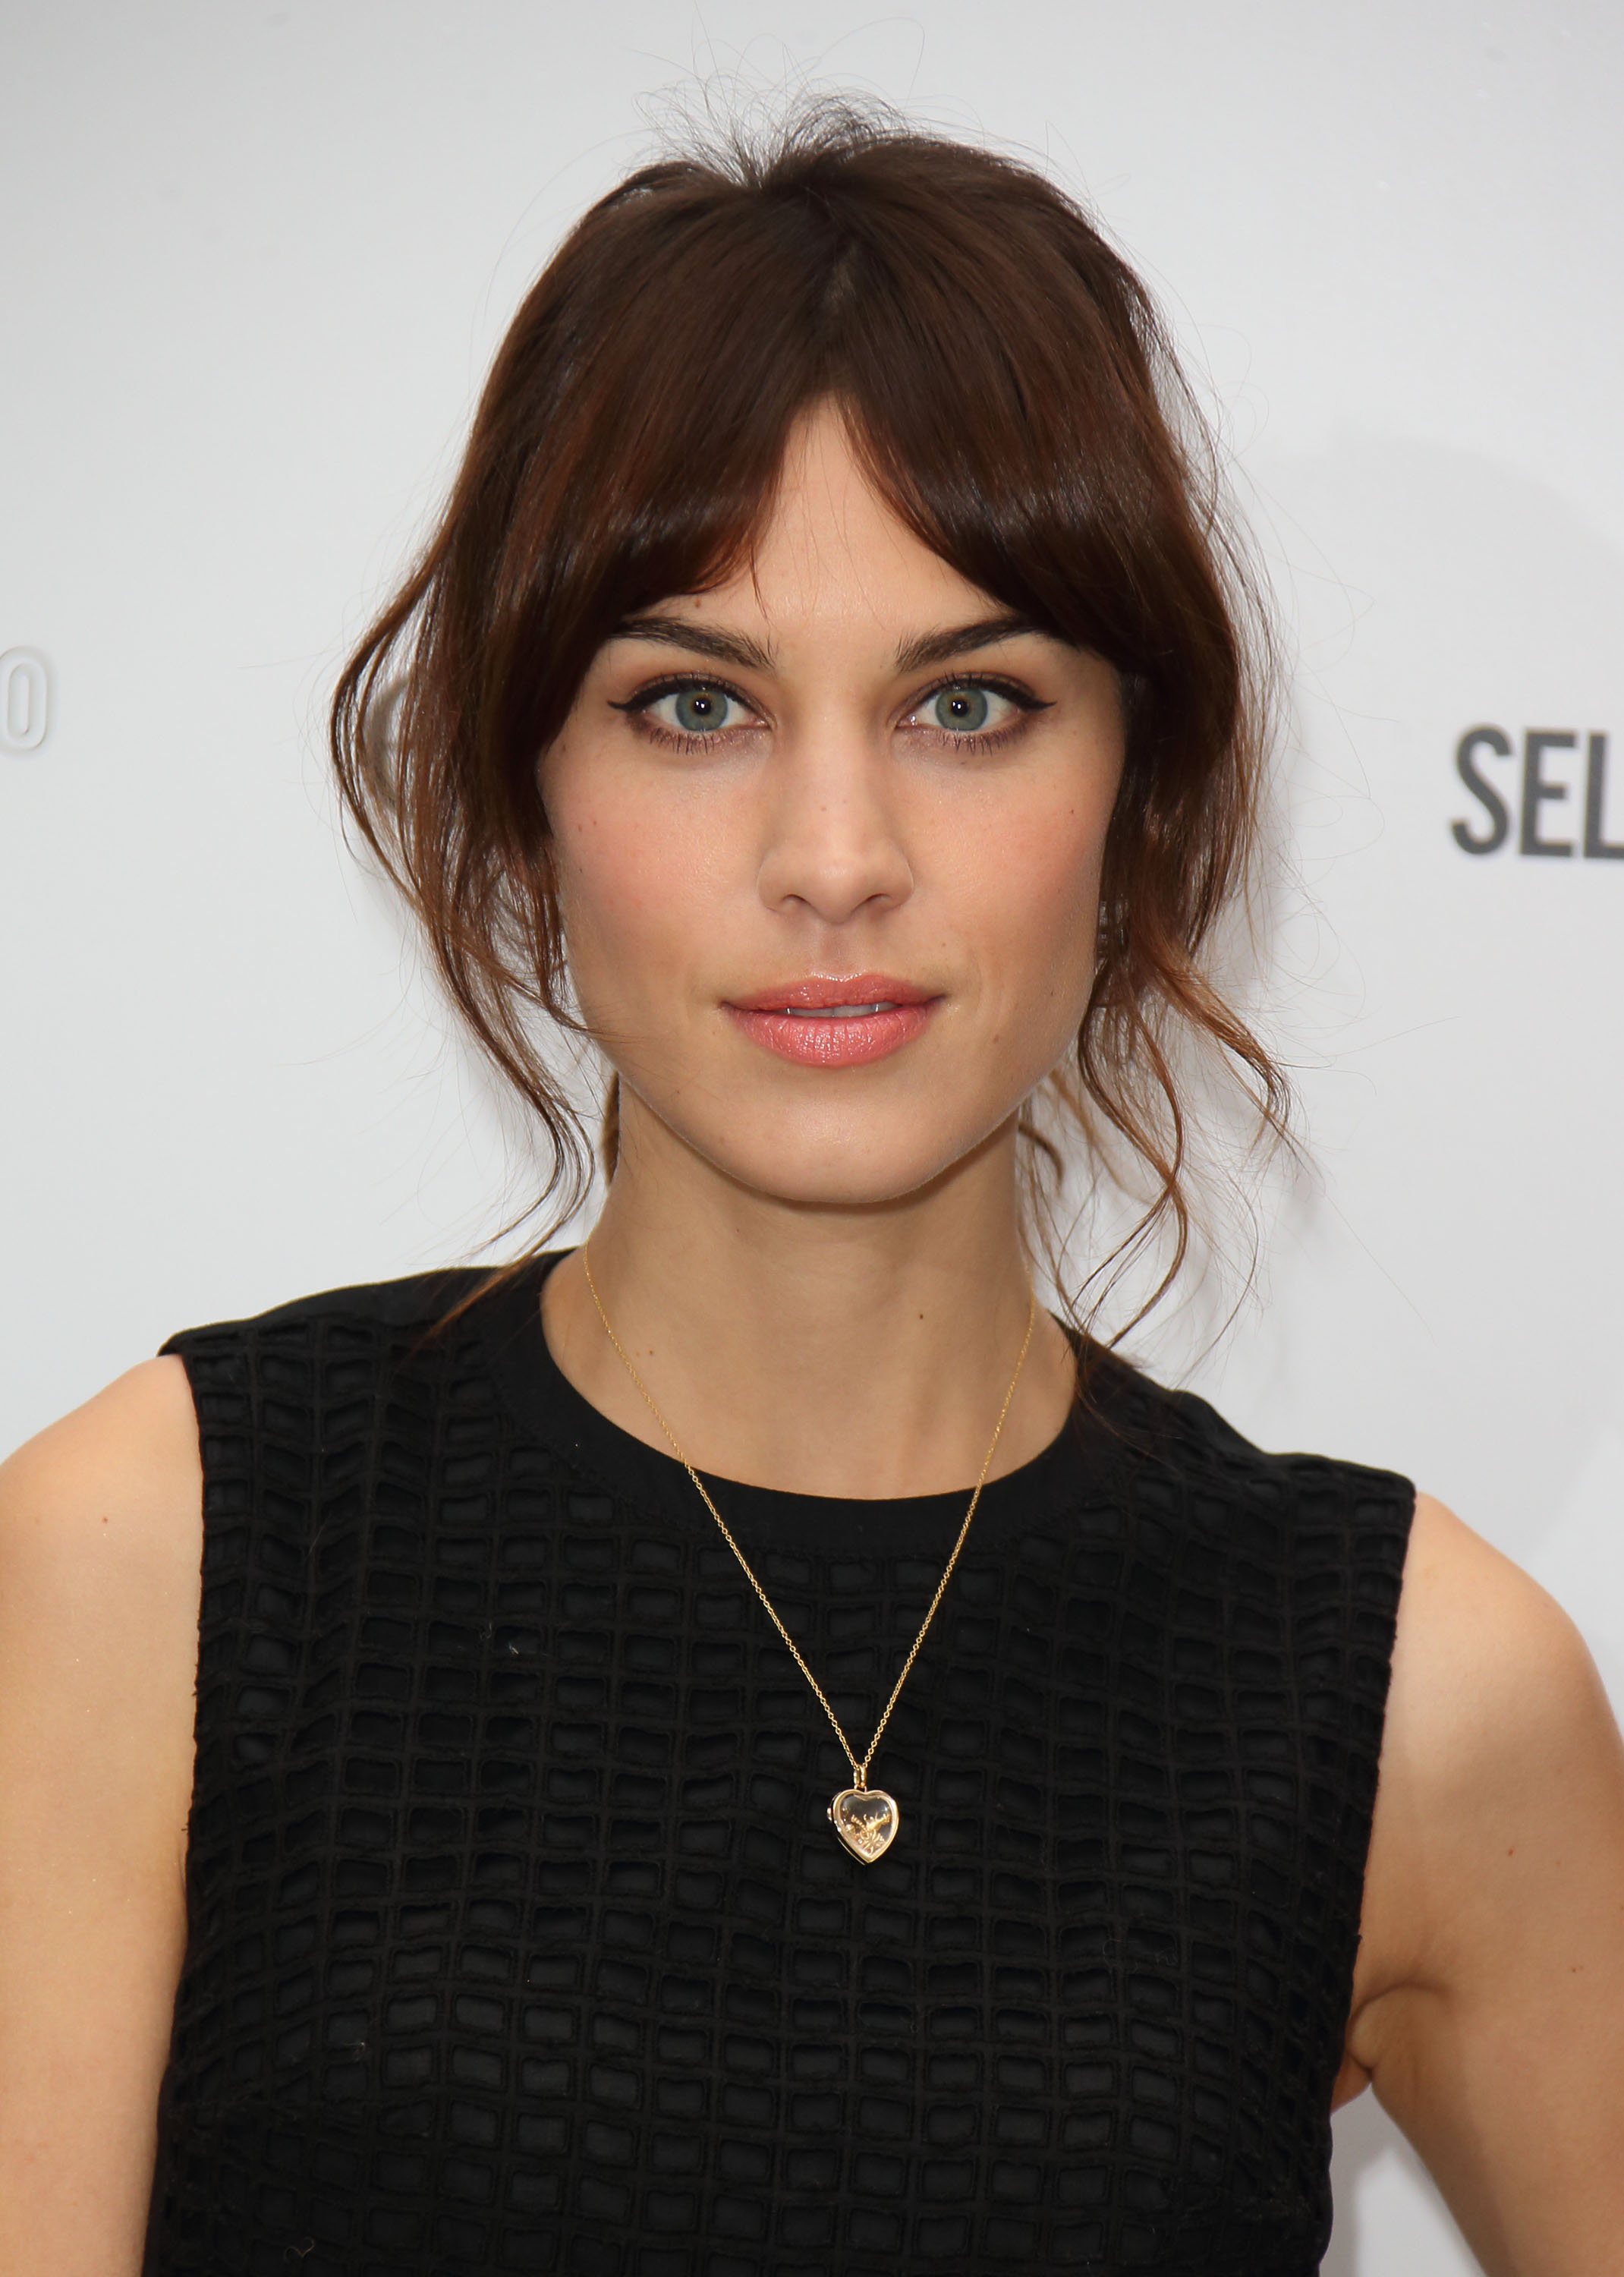 Alexa Chung on Her Signature Cat Eye and Finding Her Identity | StyleCaster